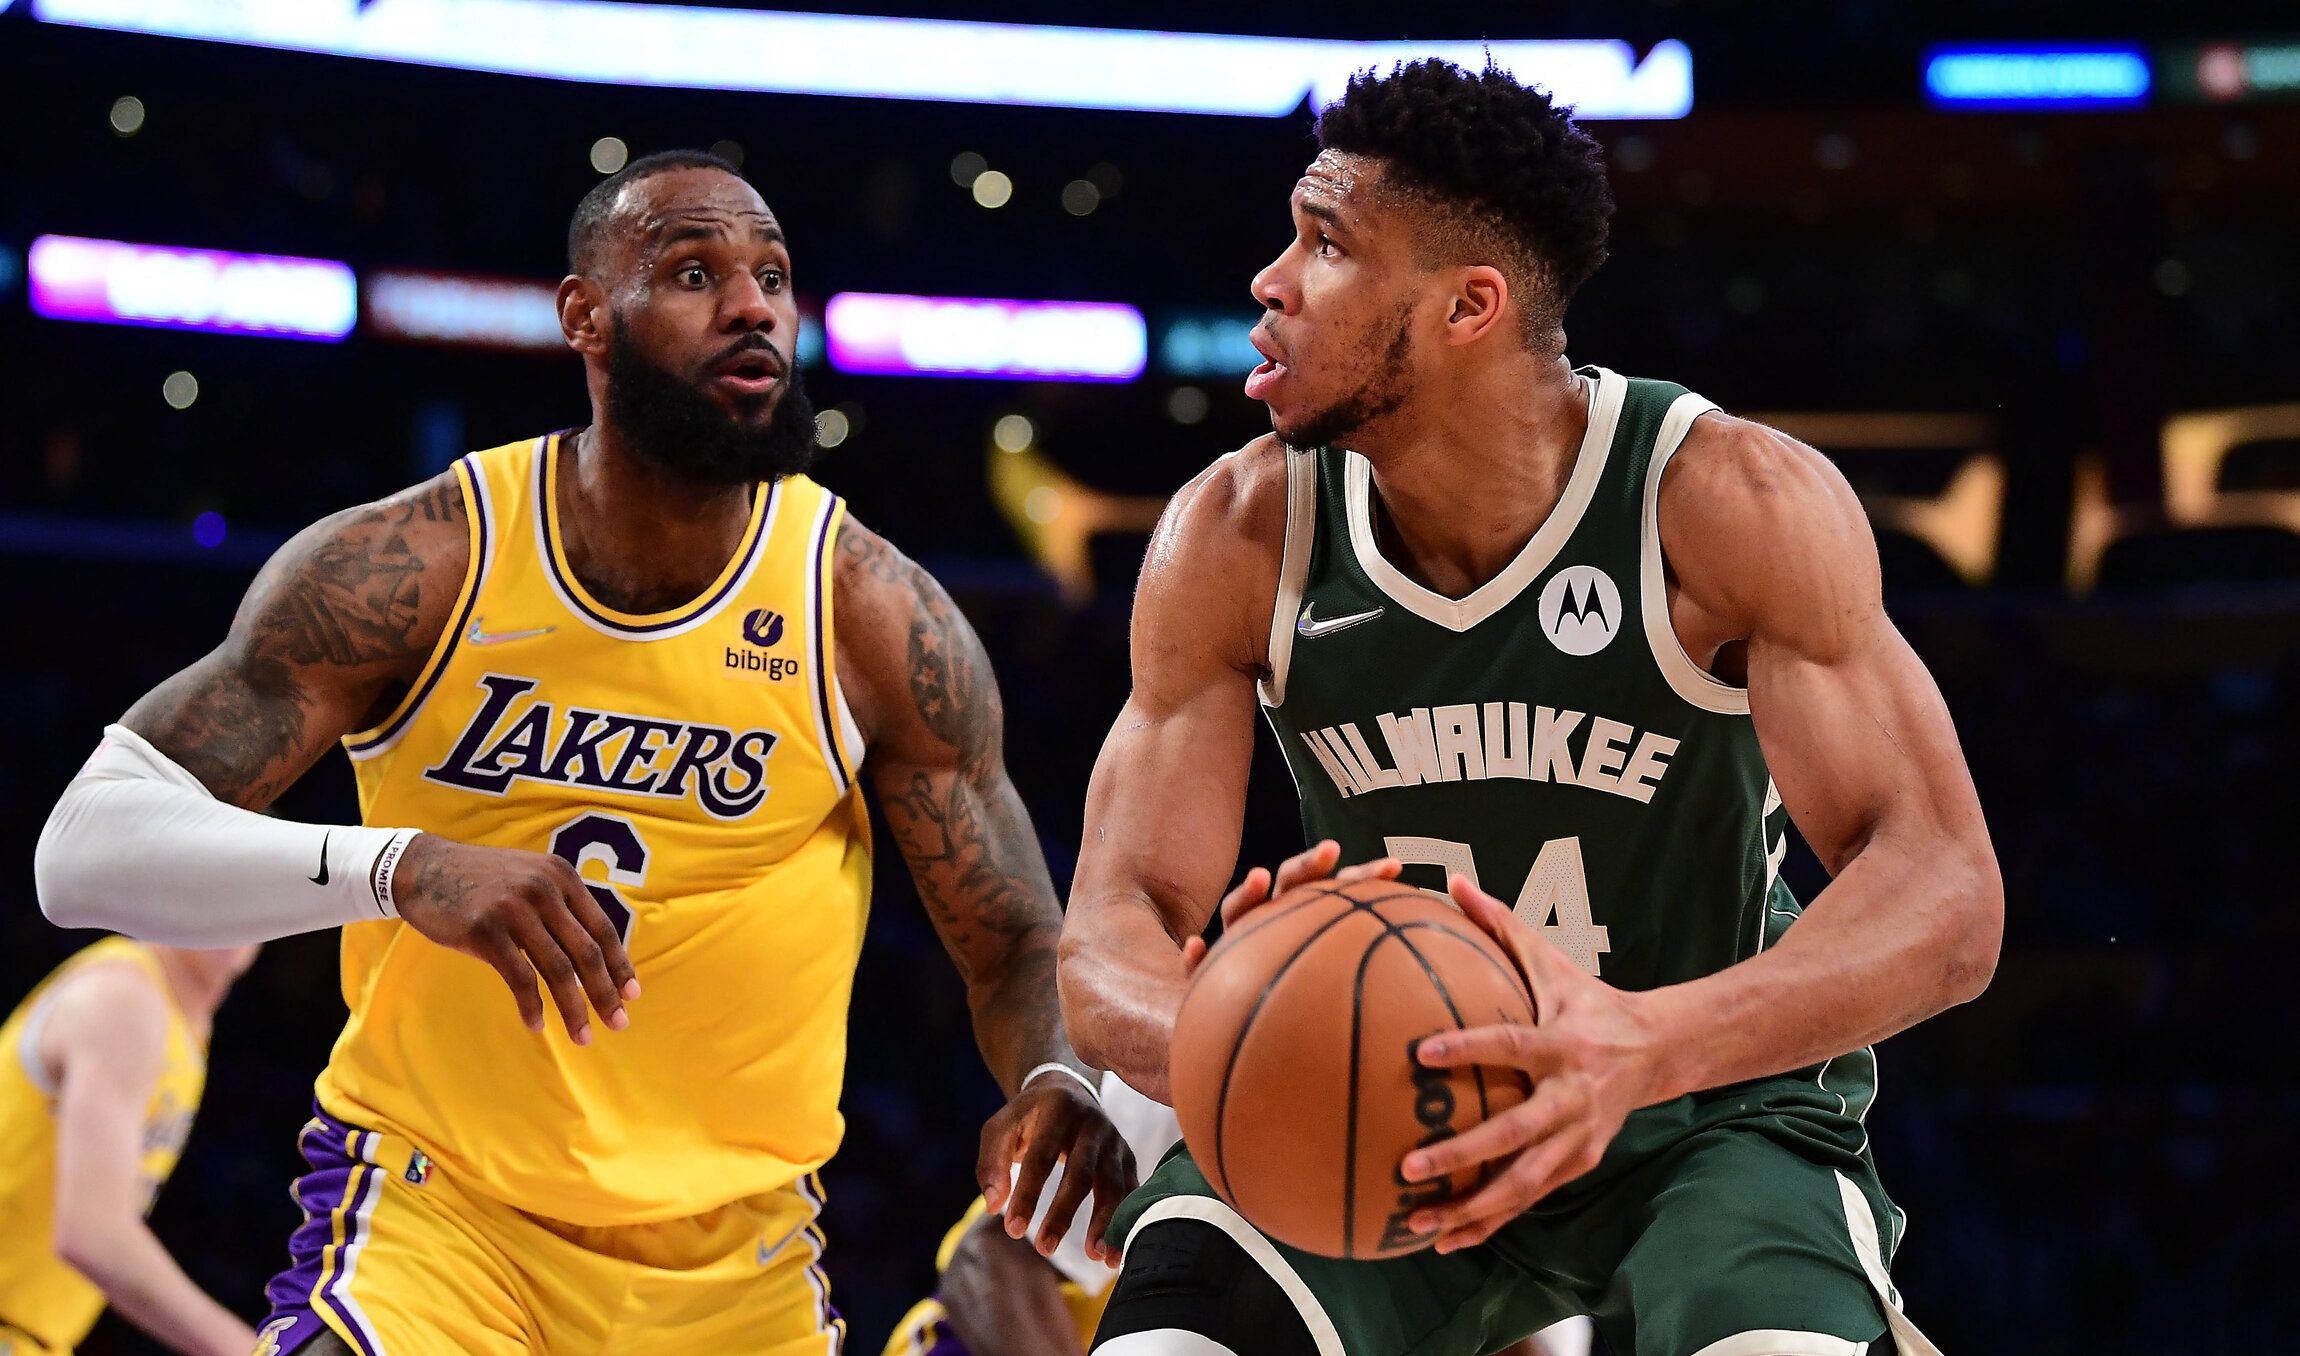 NBA All-Star Game 2023: Team Giannis wins snapping LeBron's streak